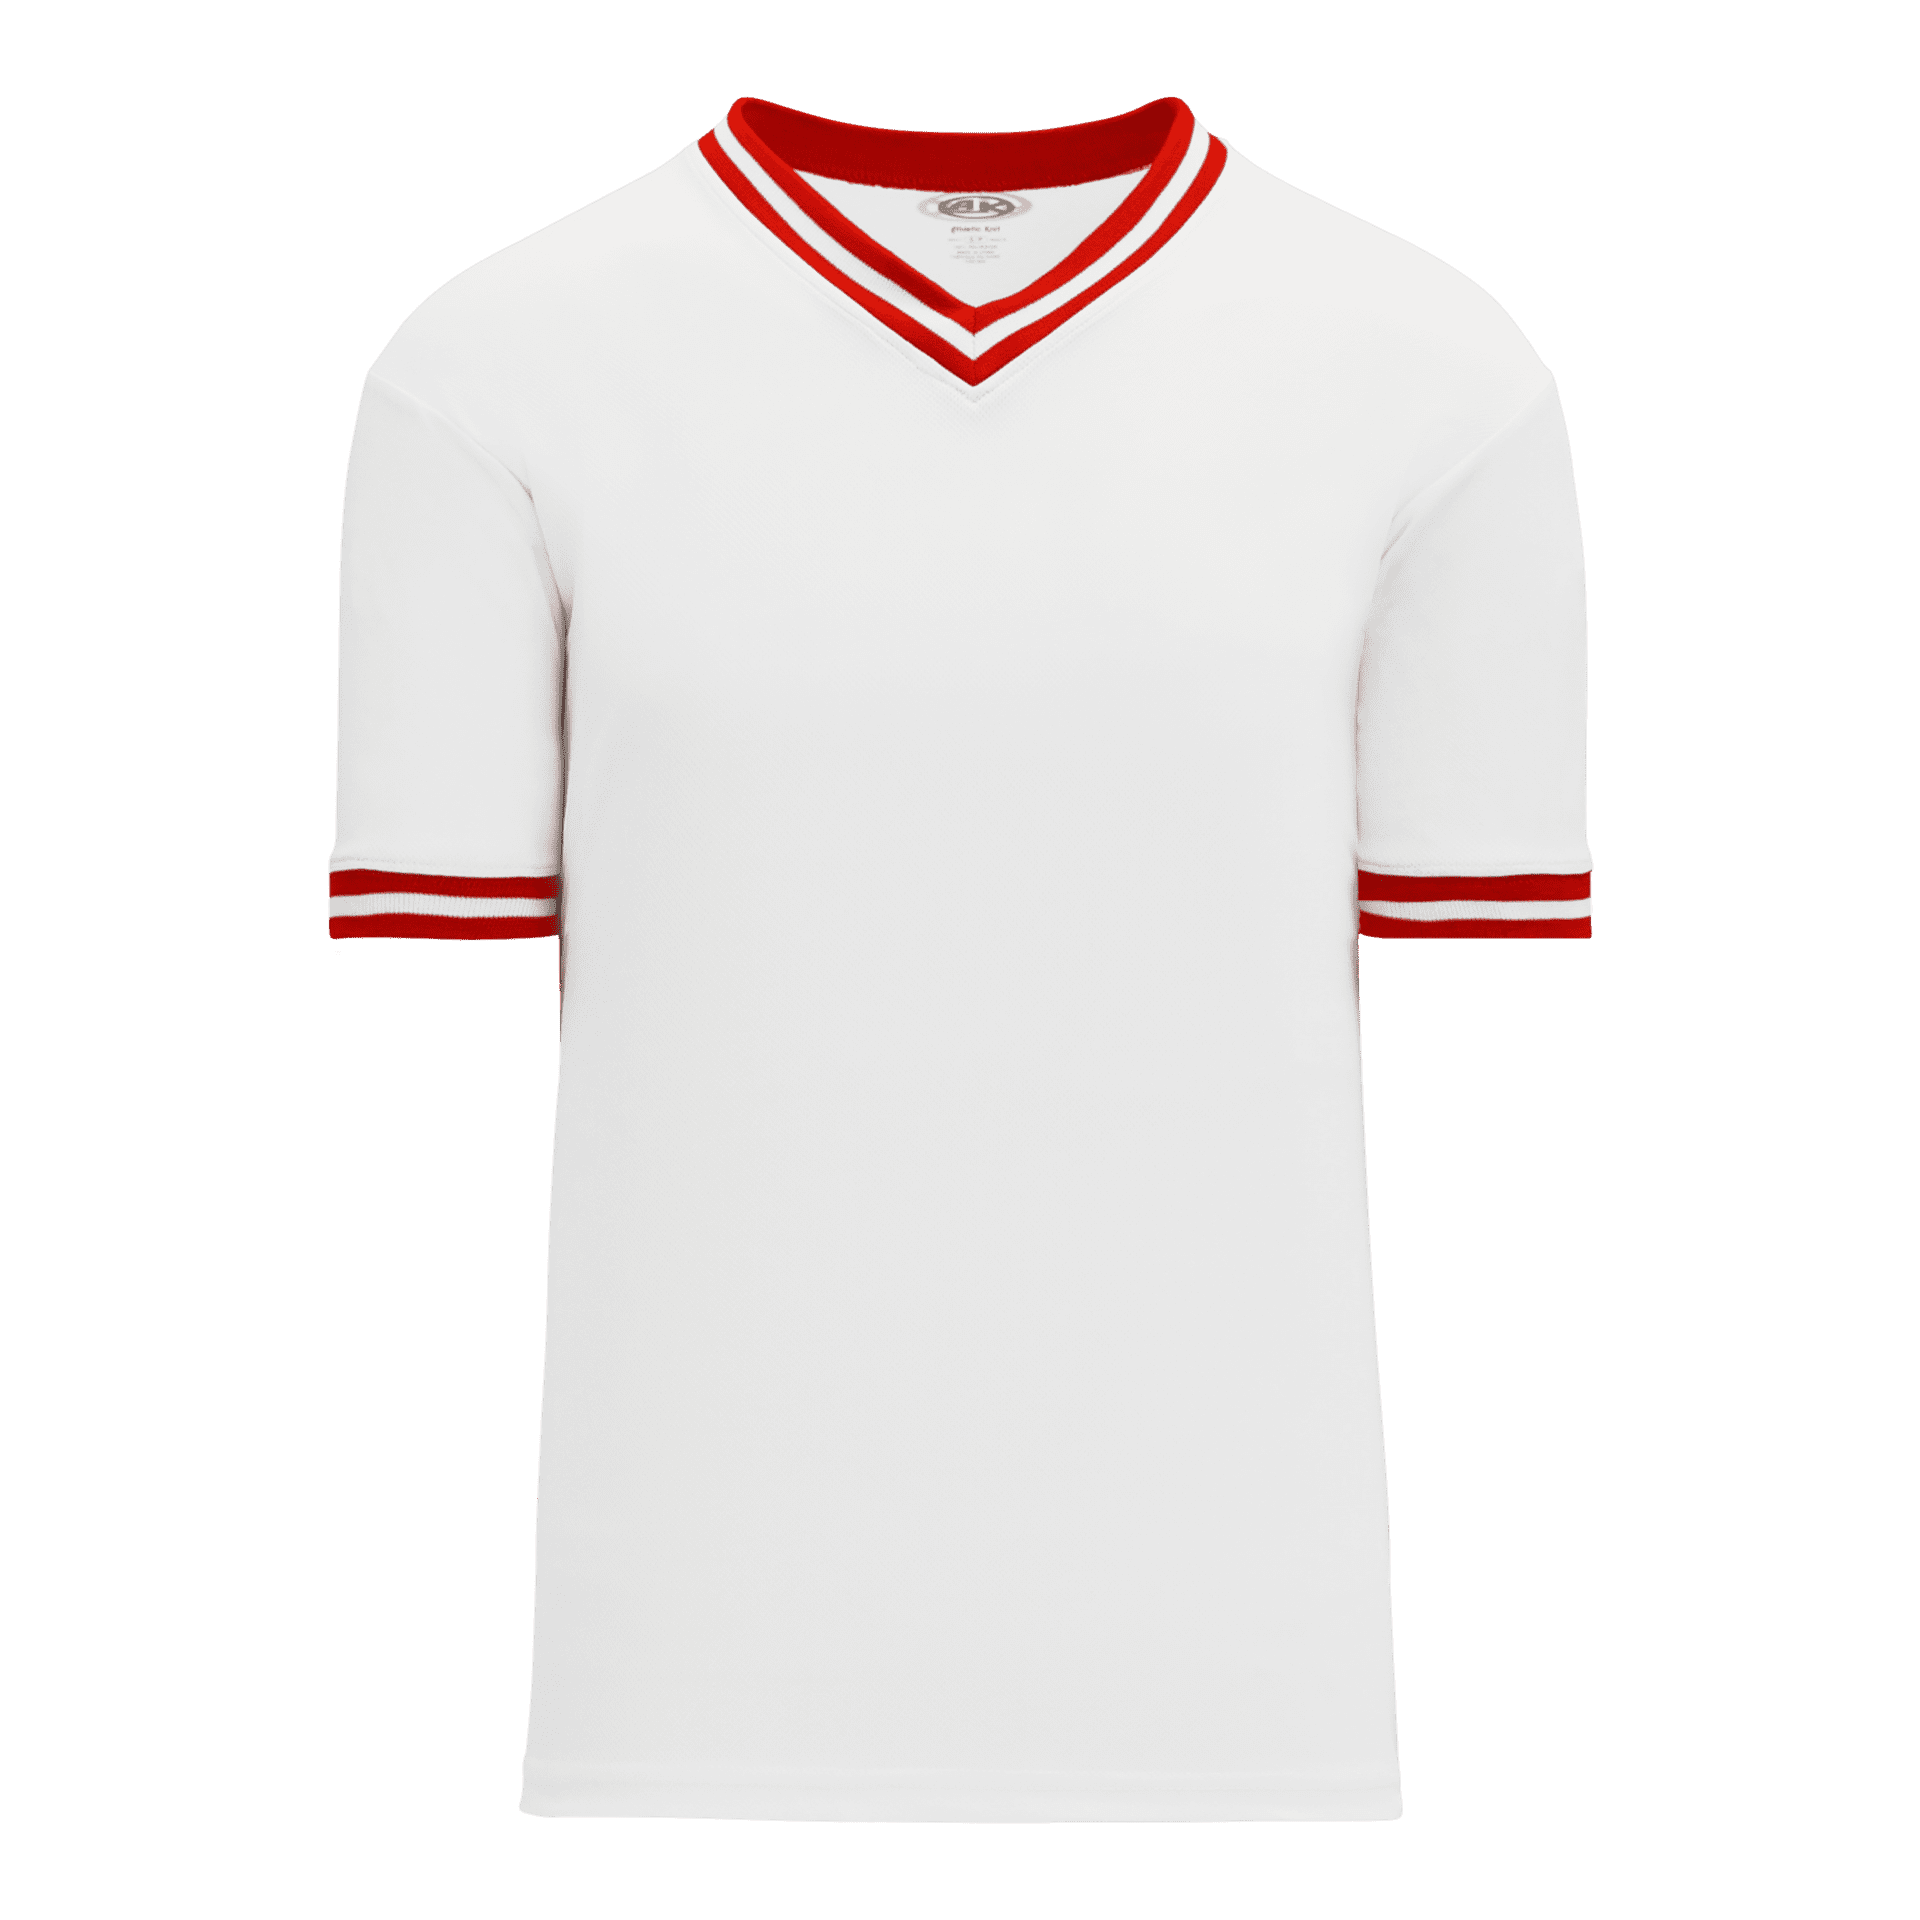 ATHLETIC KNIT PULLOVER BASEBALL JERSEY #BA1333 White / Red